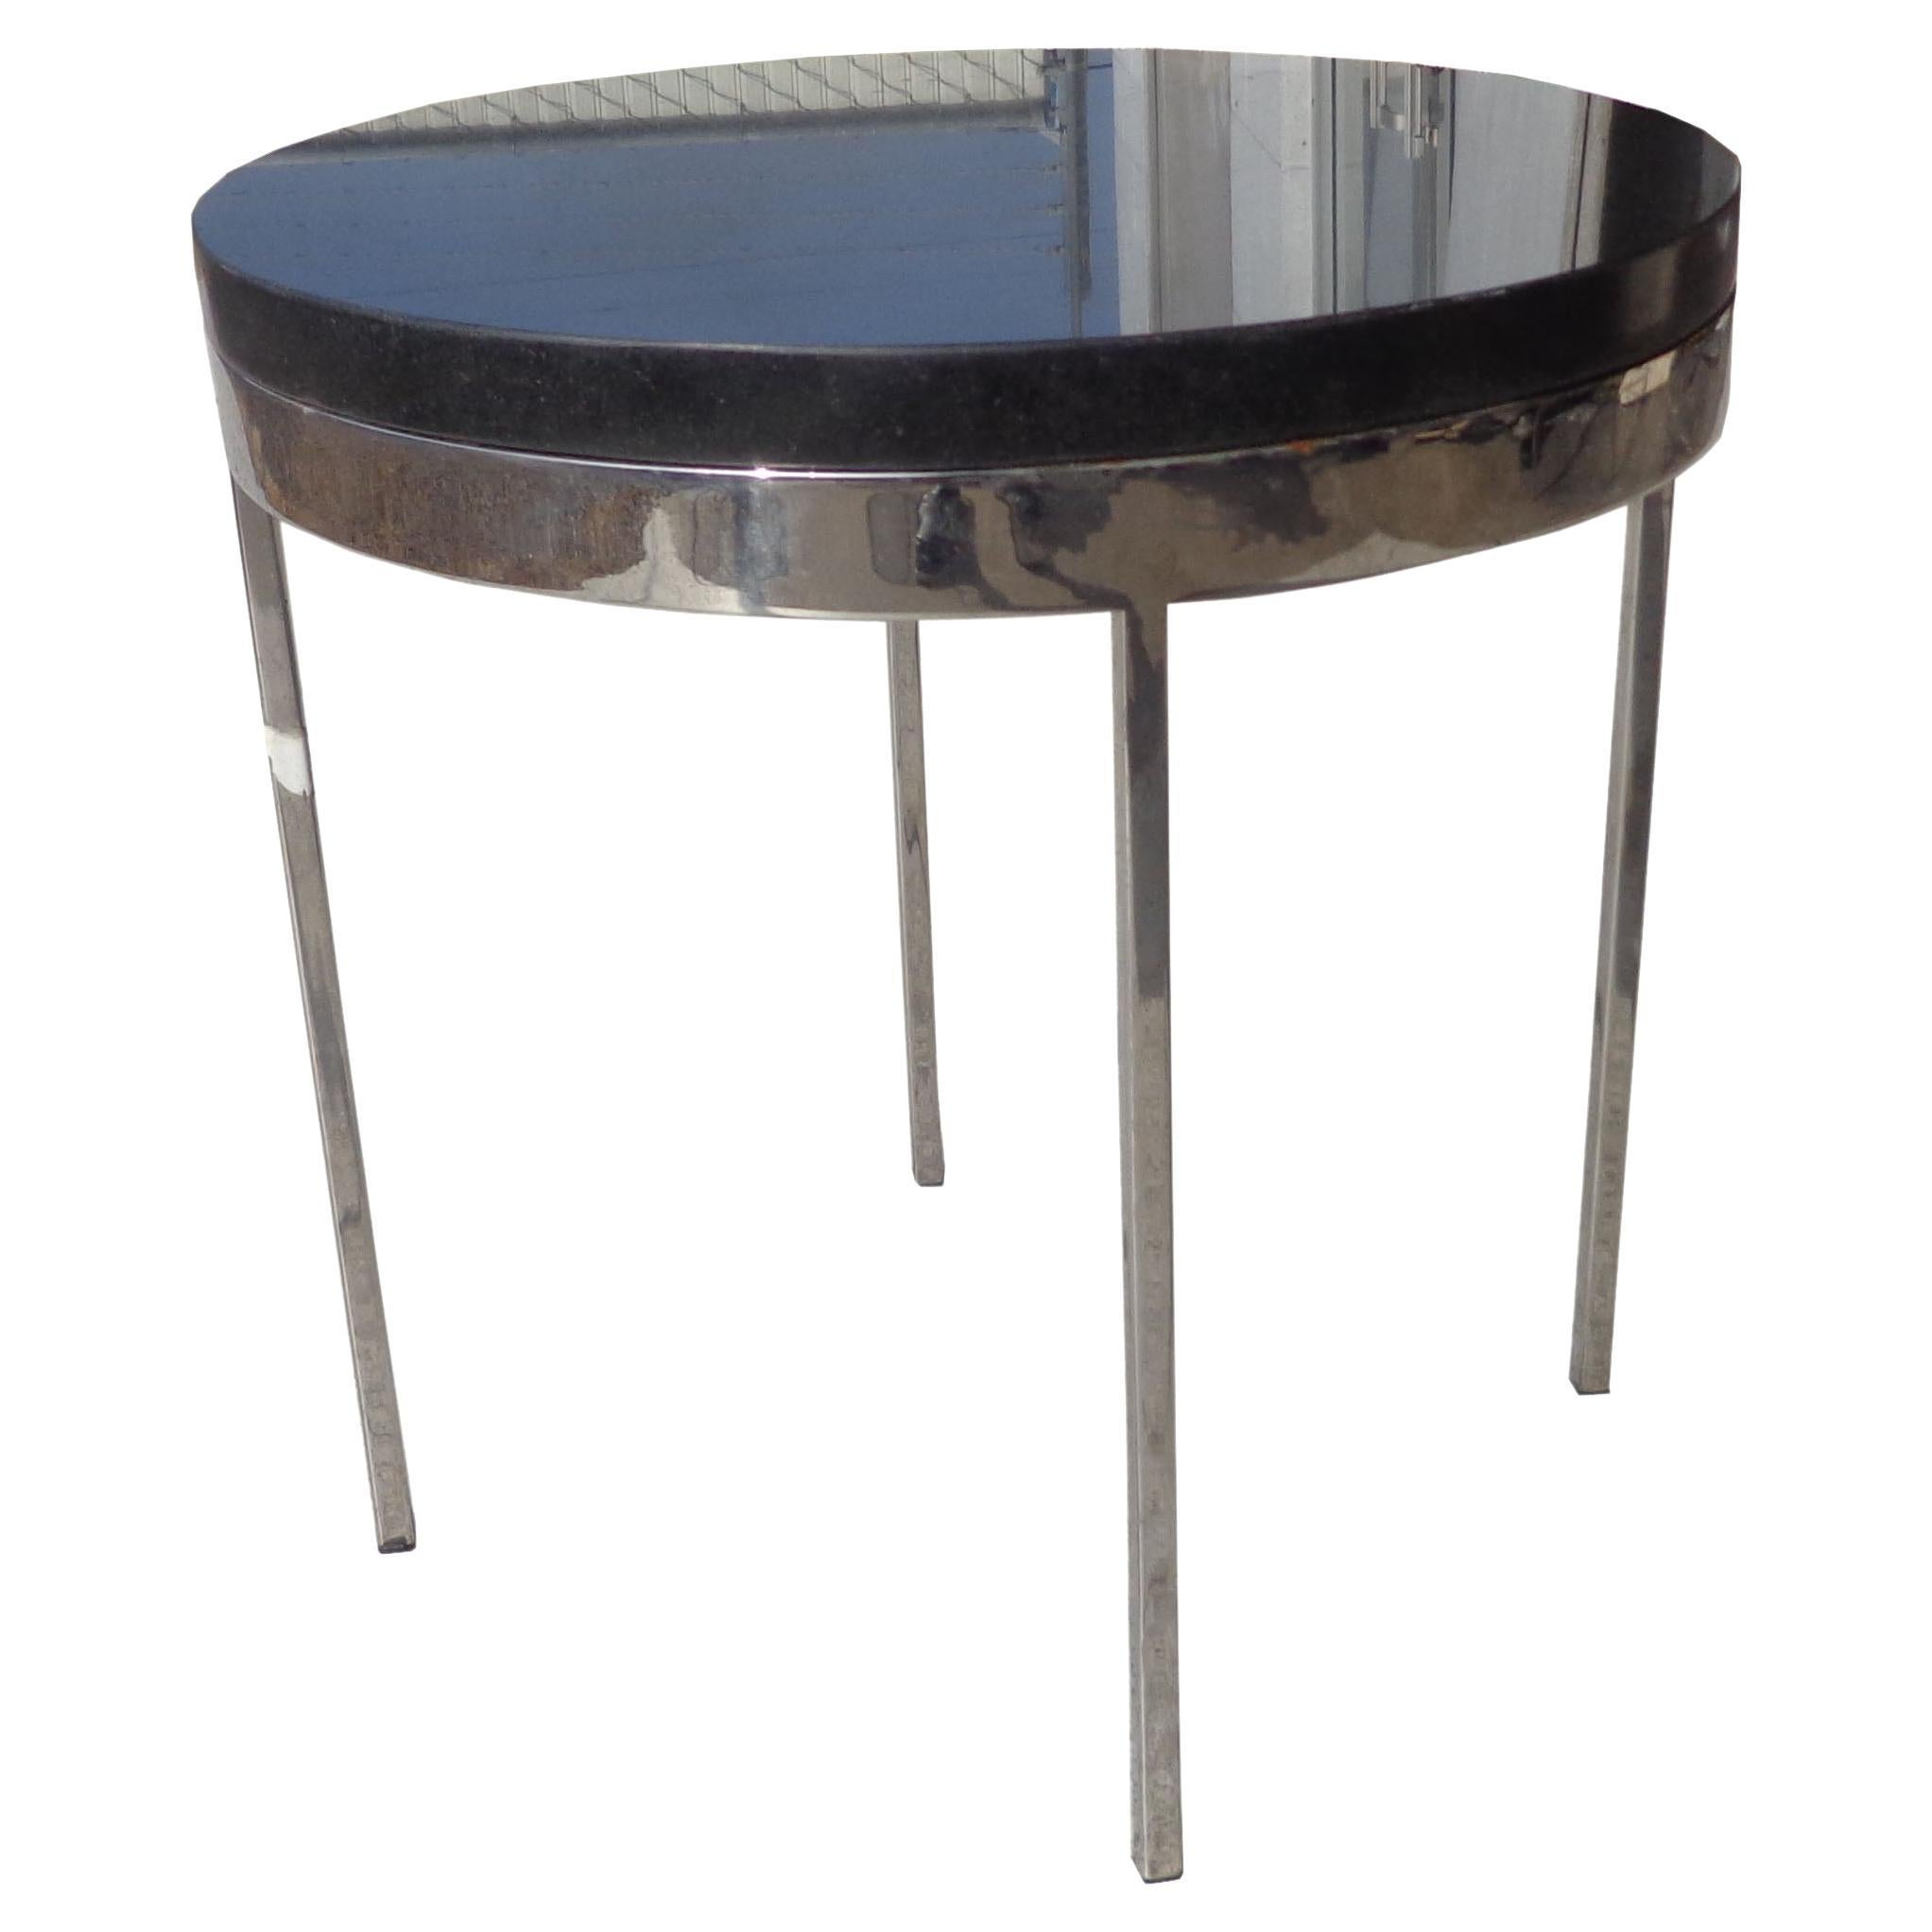 Granite and chrome side table in the style of Nicos Zographos

Polished chrome base with a black granite top. 

Measures: 18.5